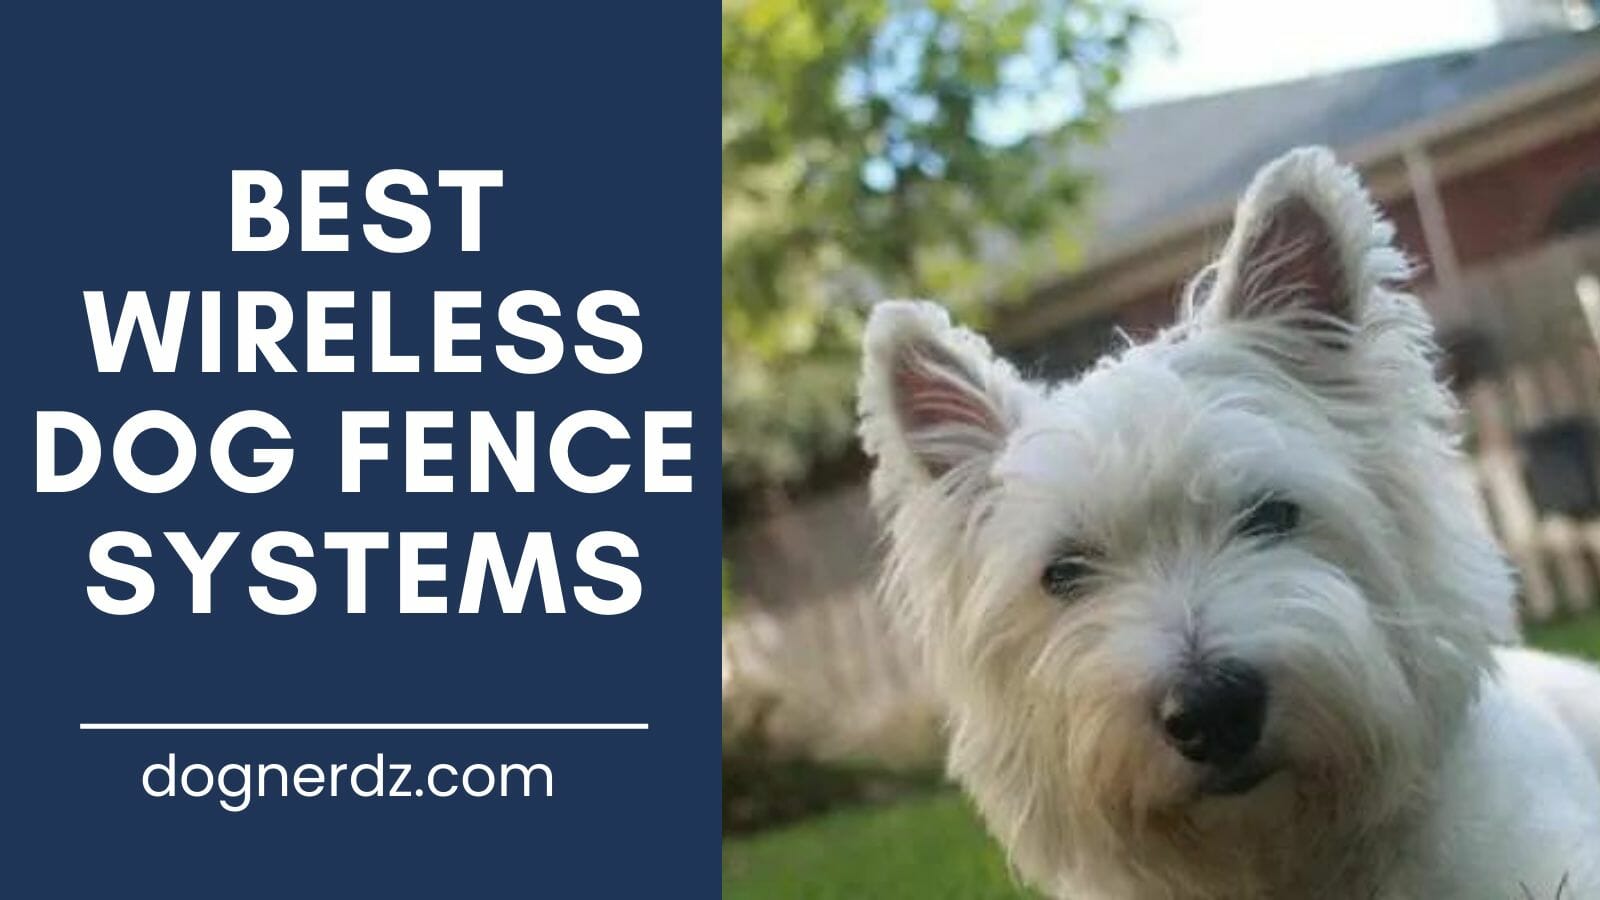 reviews of the best wireless dog fence systems